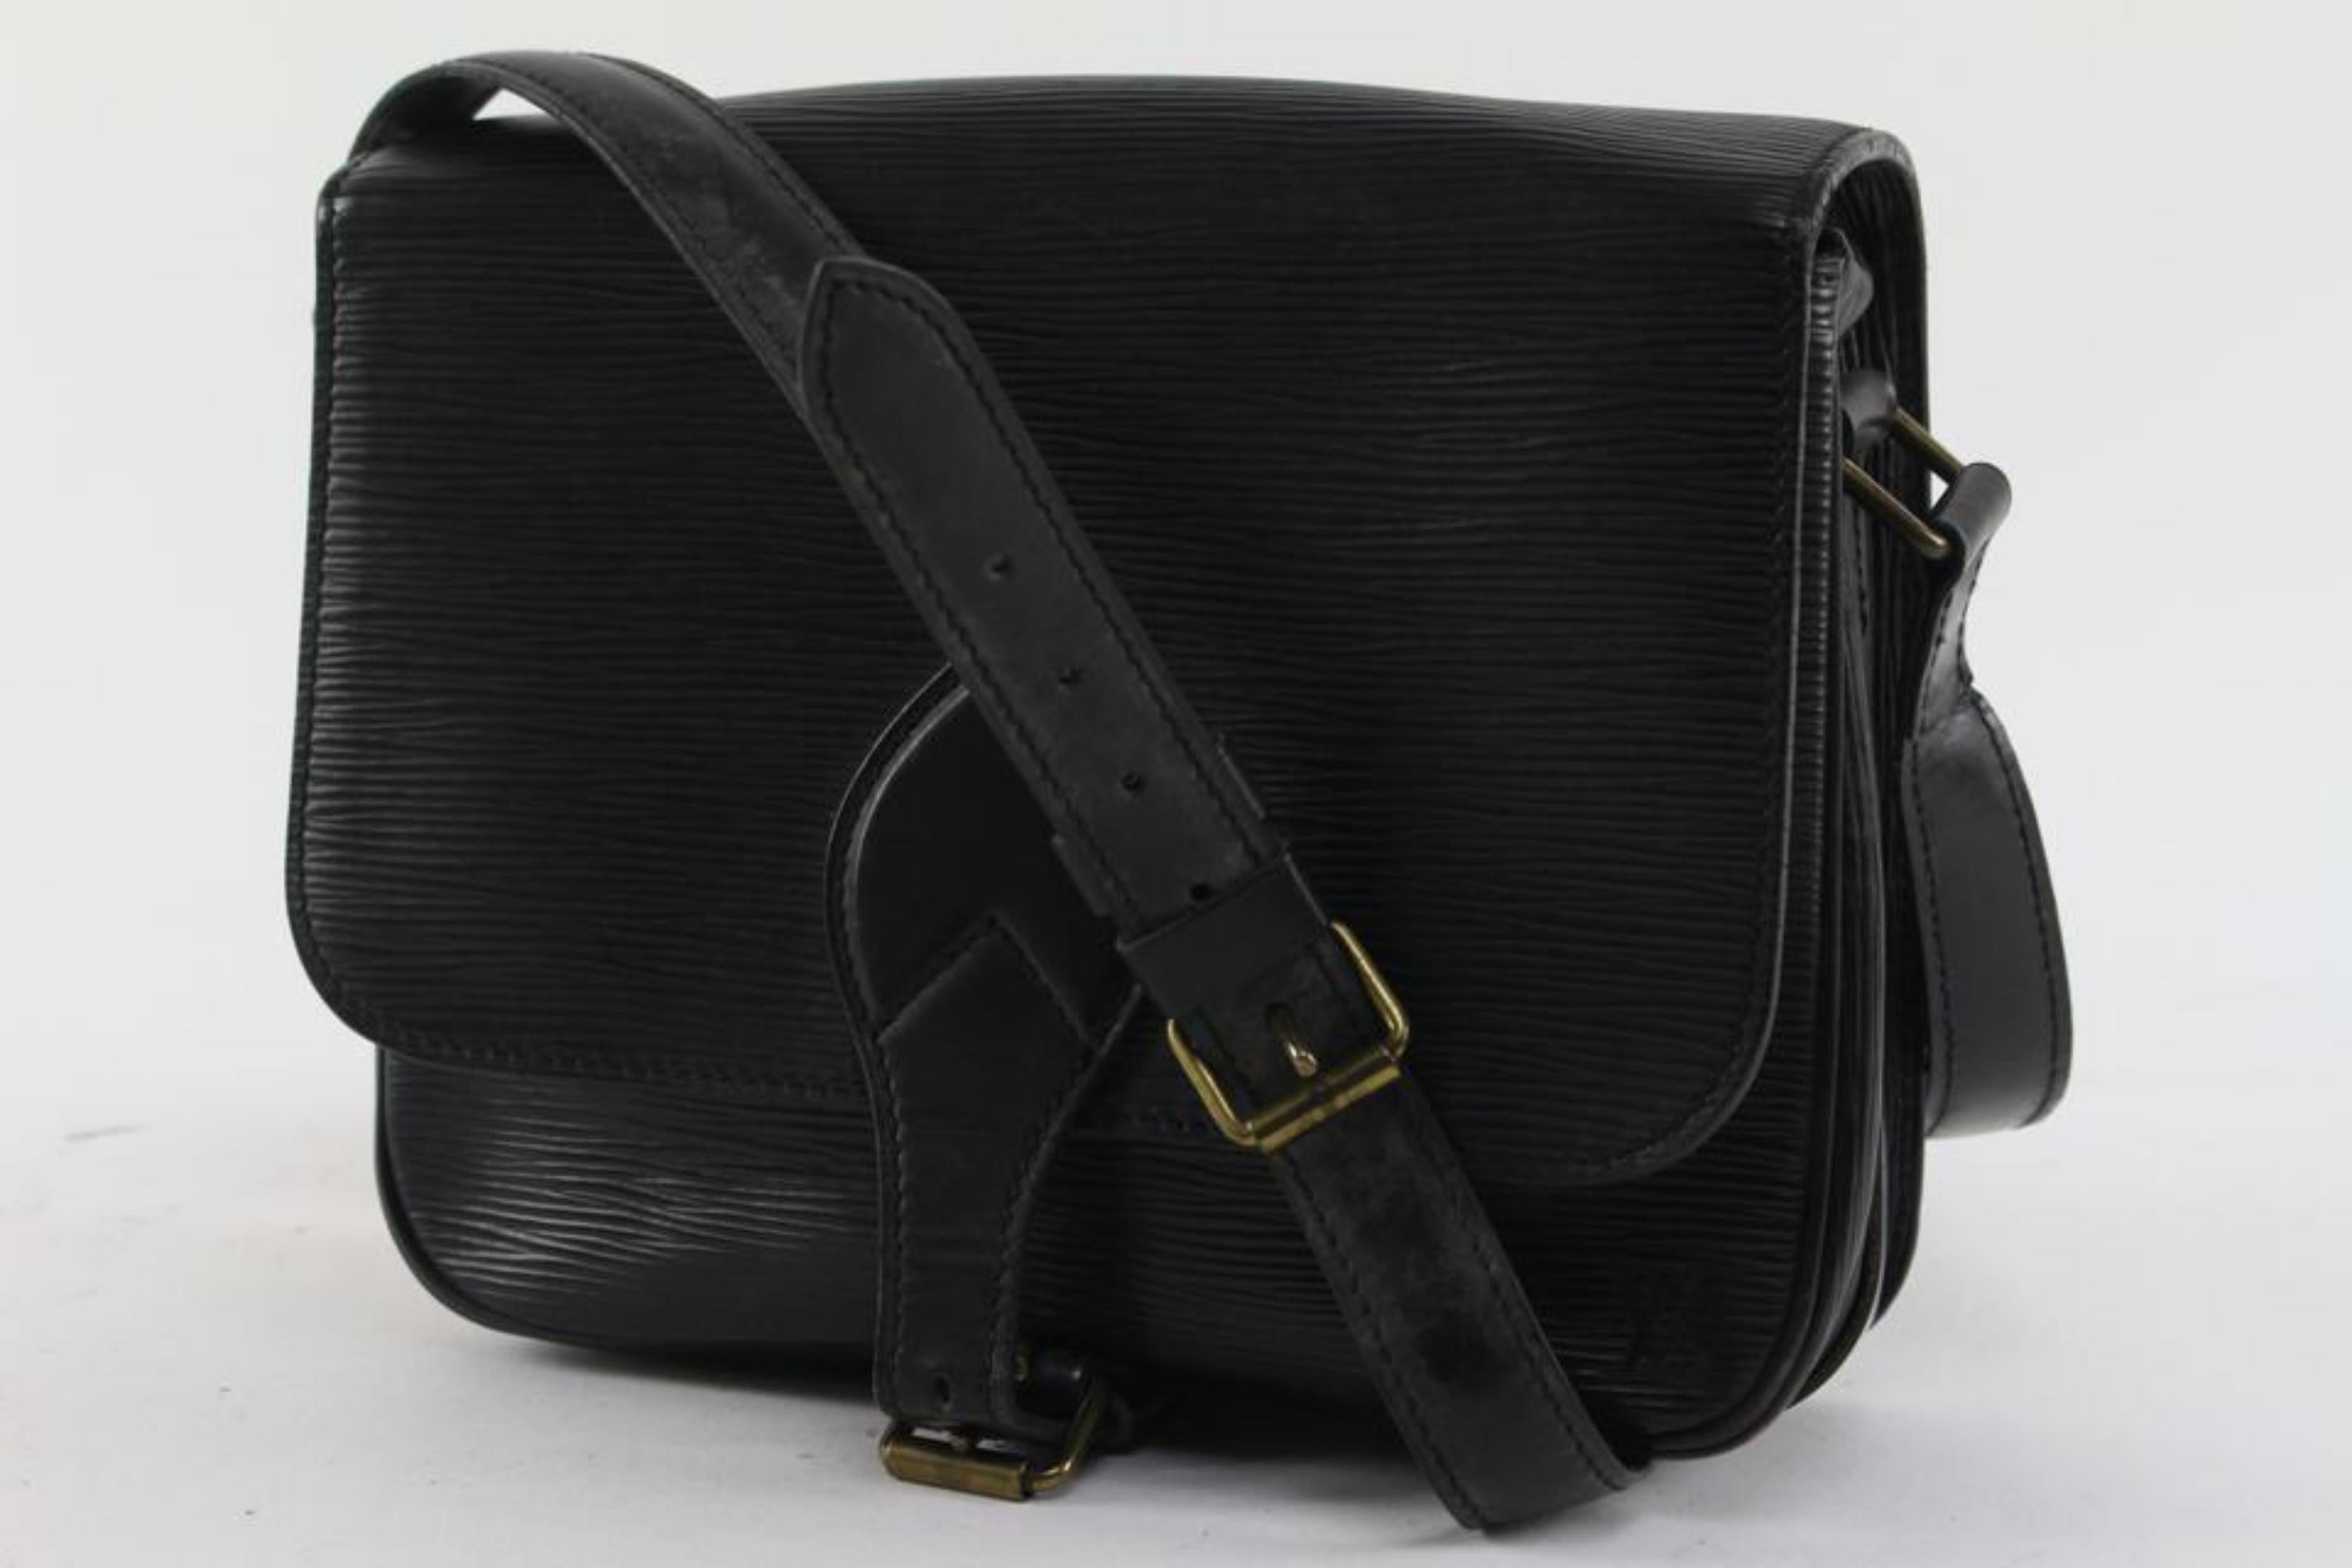 Louis Vuitton Black Epi Leather Noir Cartouchiere Crossbody Bag 5lv1020 In Fair Condition For Sale In Dix hills, NY